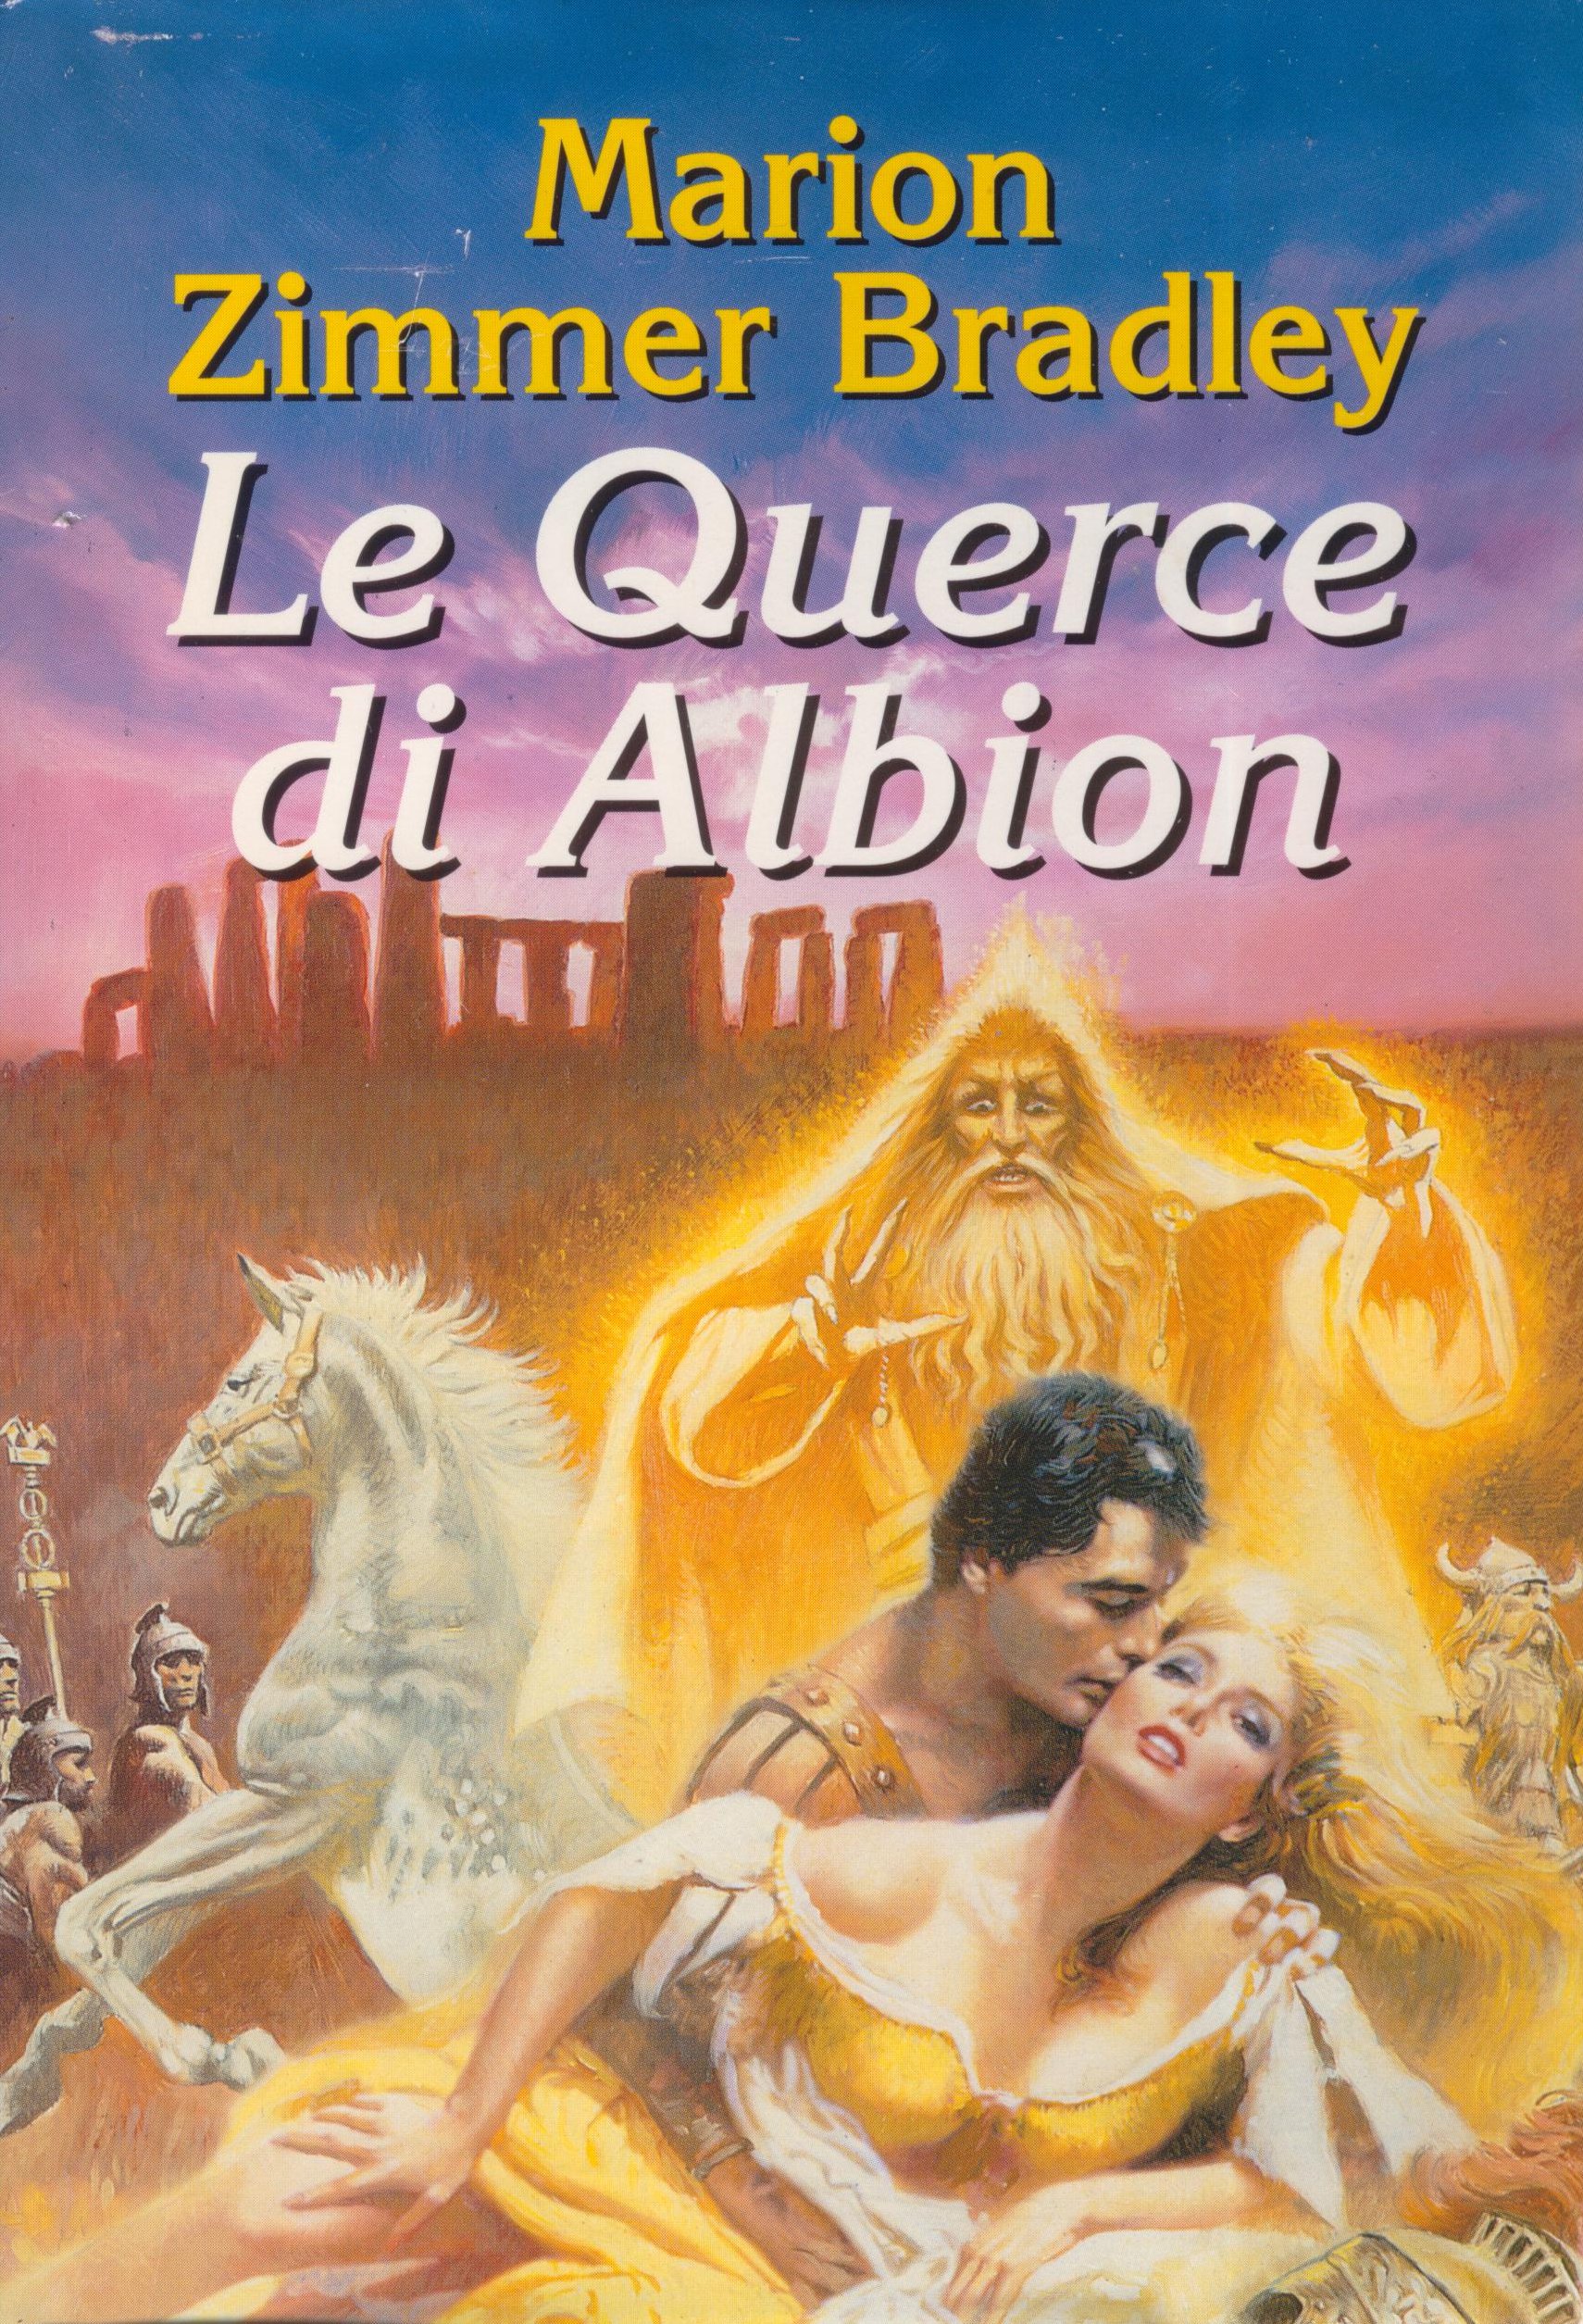 Le querce di Albion - Marion Zimmer Bradley - Anobii